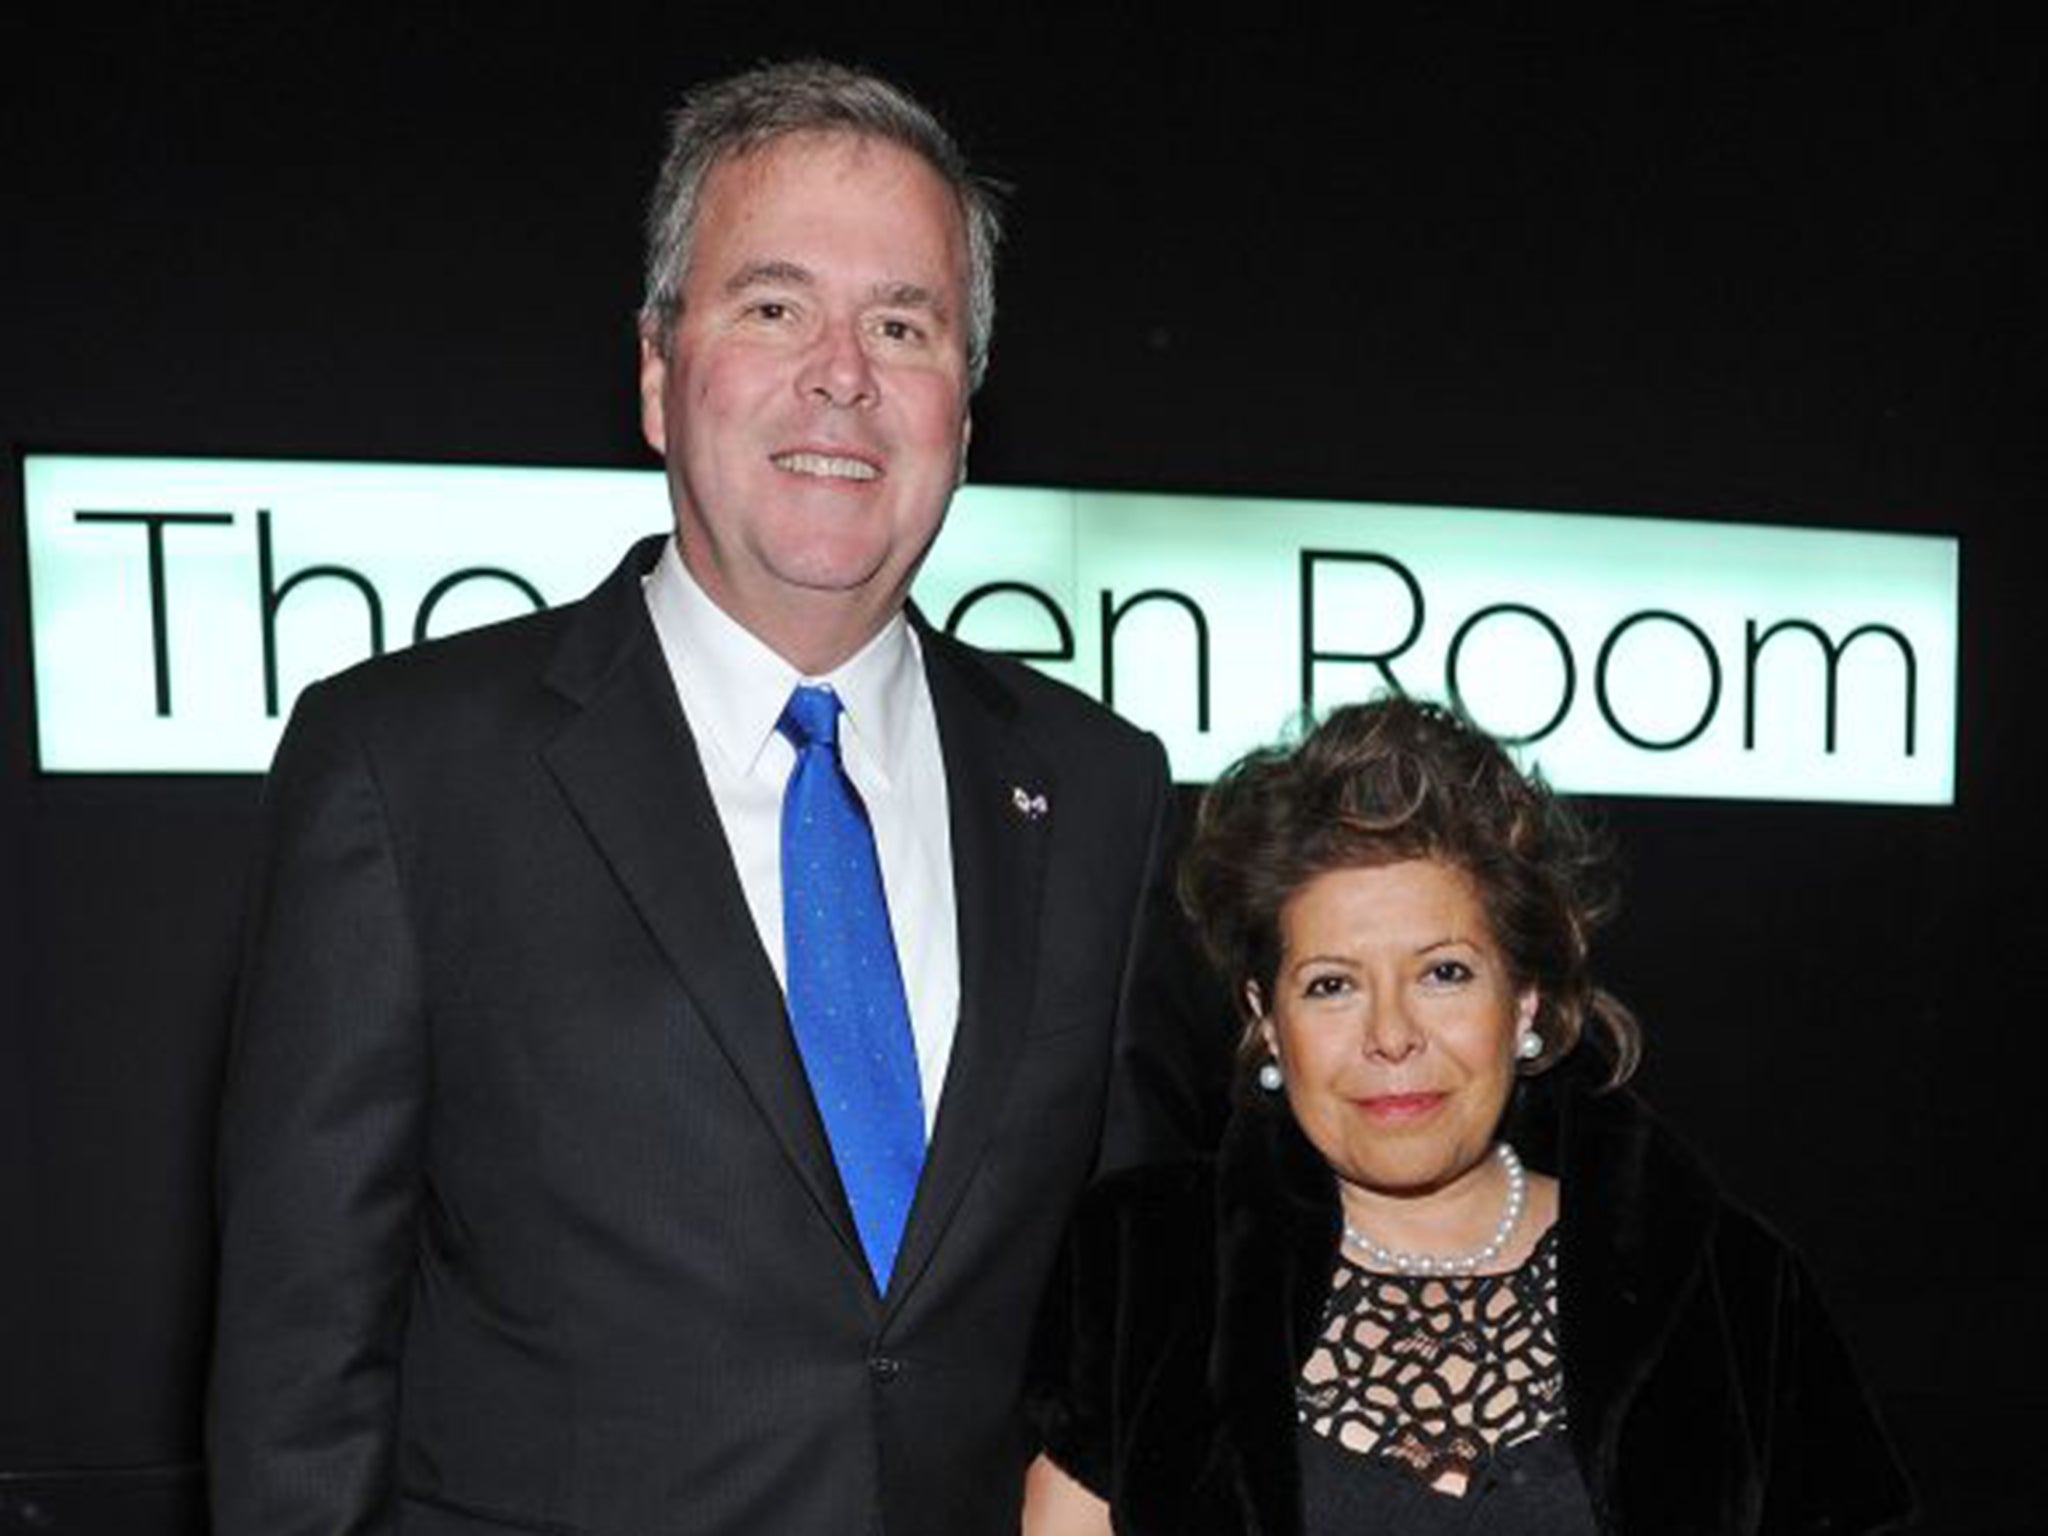 Republican Florida Governor Jeb Bush, with his wife, Columba, who is reported to have taken out a loan of $42,311 from a Florida jeweller